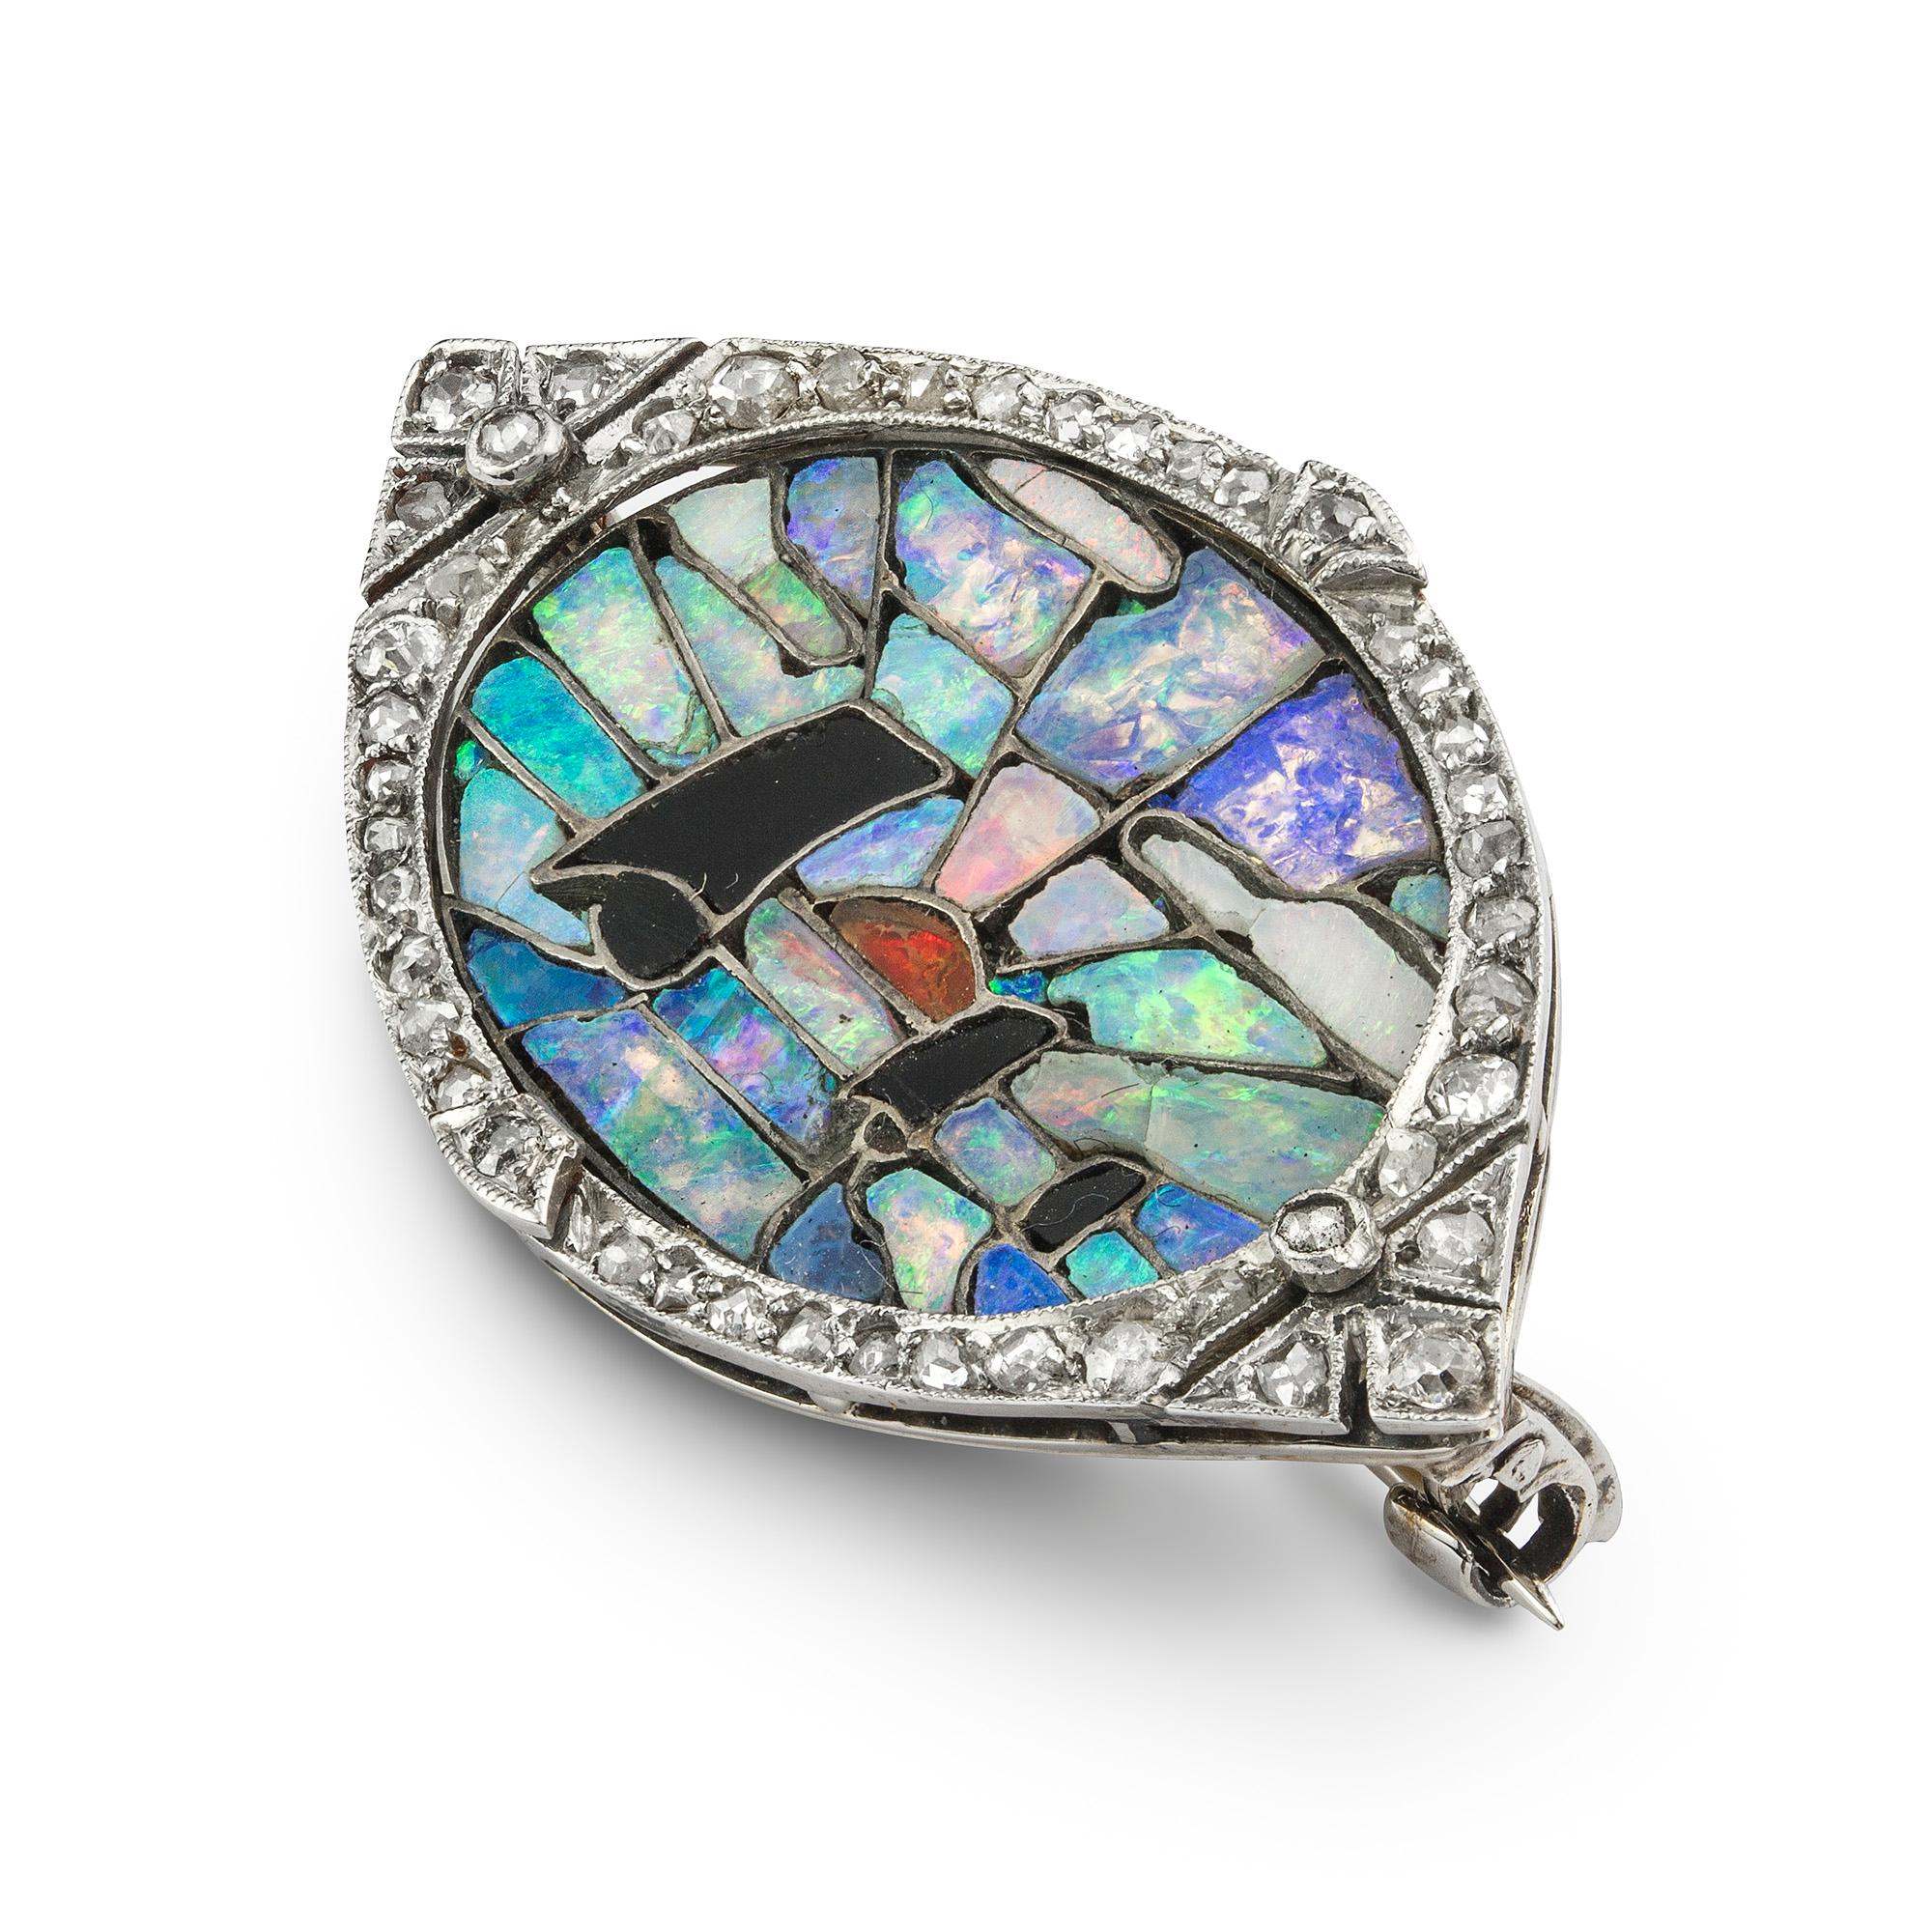 An Art Deco opal and onyx mosaic brooch, the oval panel a mosaic consisting of fire opal, black opal, and onyx, depicting three yachts at sunset, within a delicately scalloped border set with rose-cut diamonds, all set in platinum with gold back and